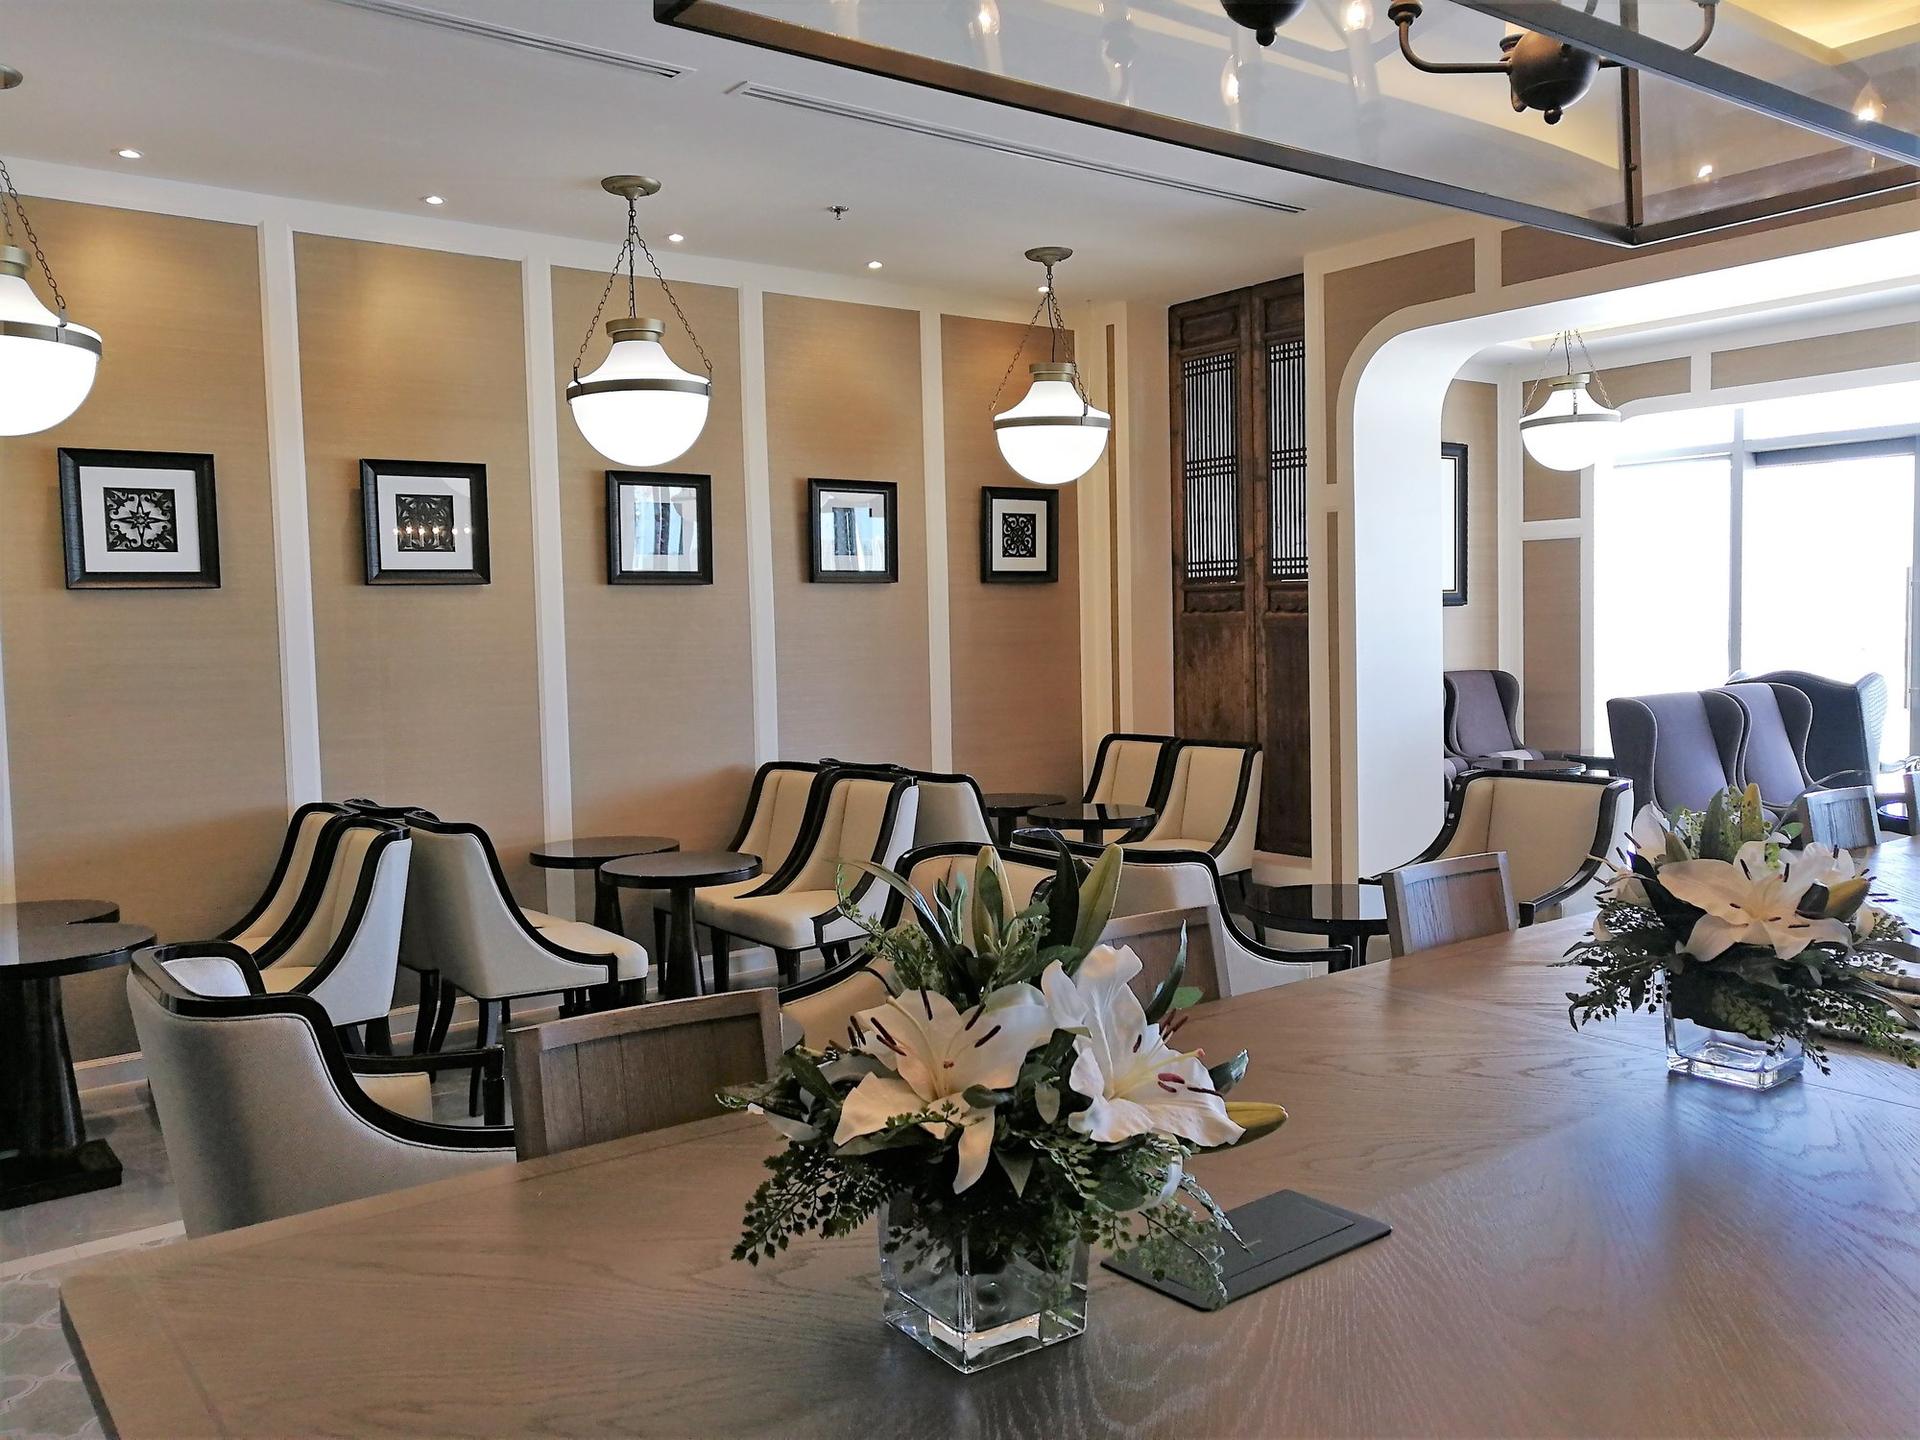 The Coral Executive Lounge image 4 of 22